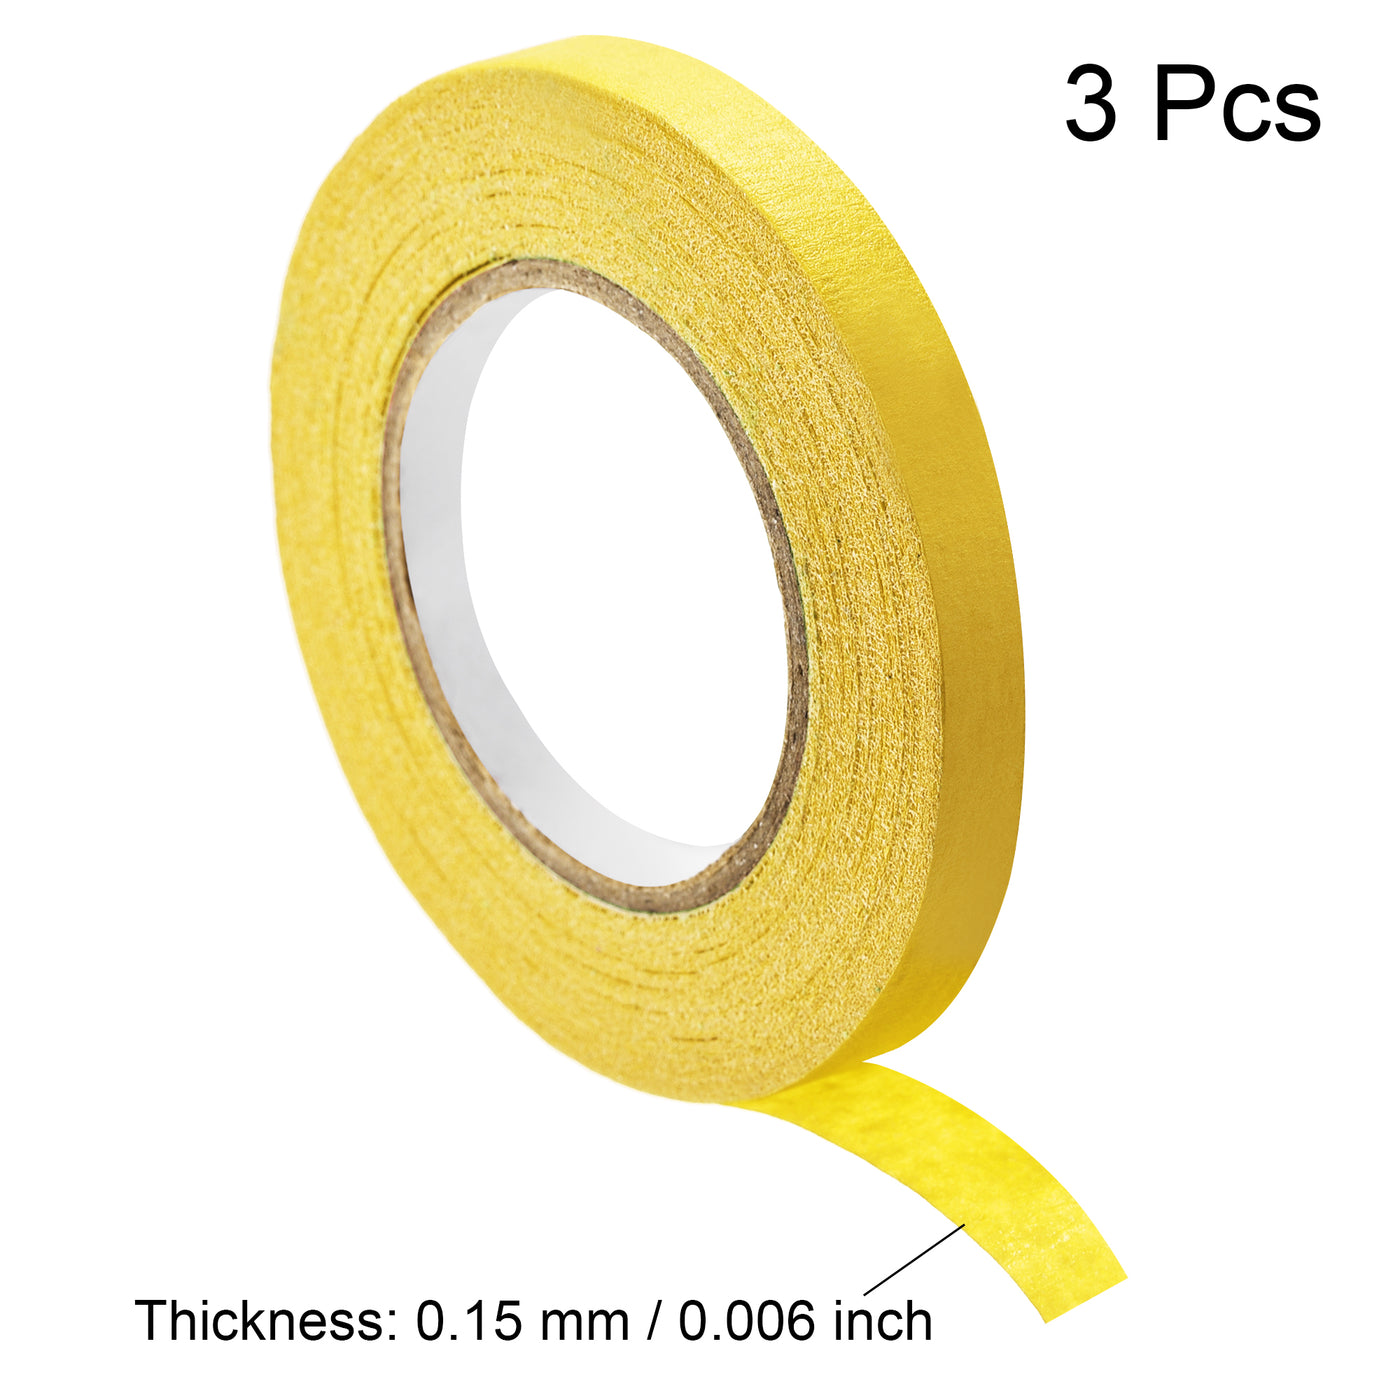 uxcell Uxcell 3Pcs 10mm 0.4 inch Wide 20m 21 Yards Masking Tape Painters Tape Rolls Yellow